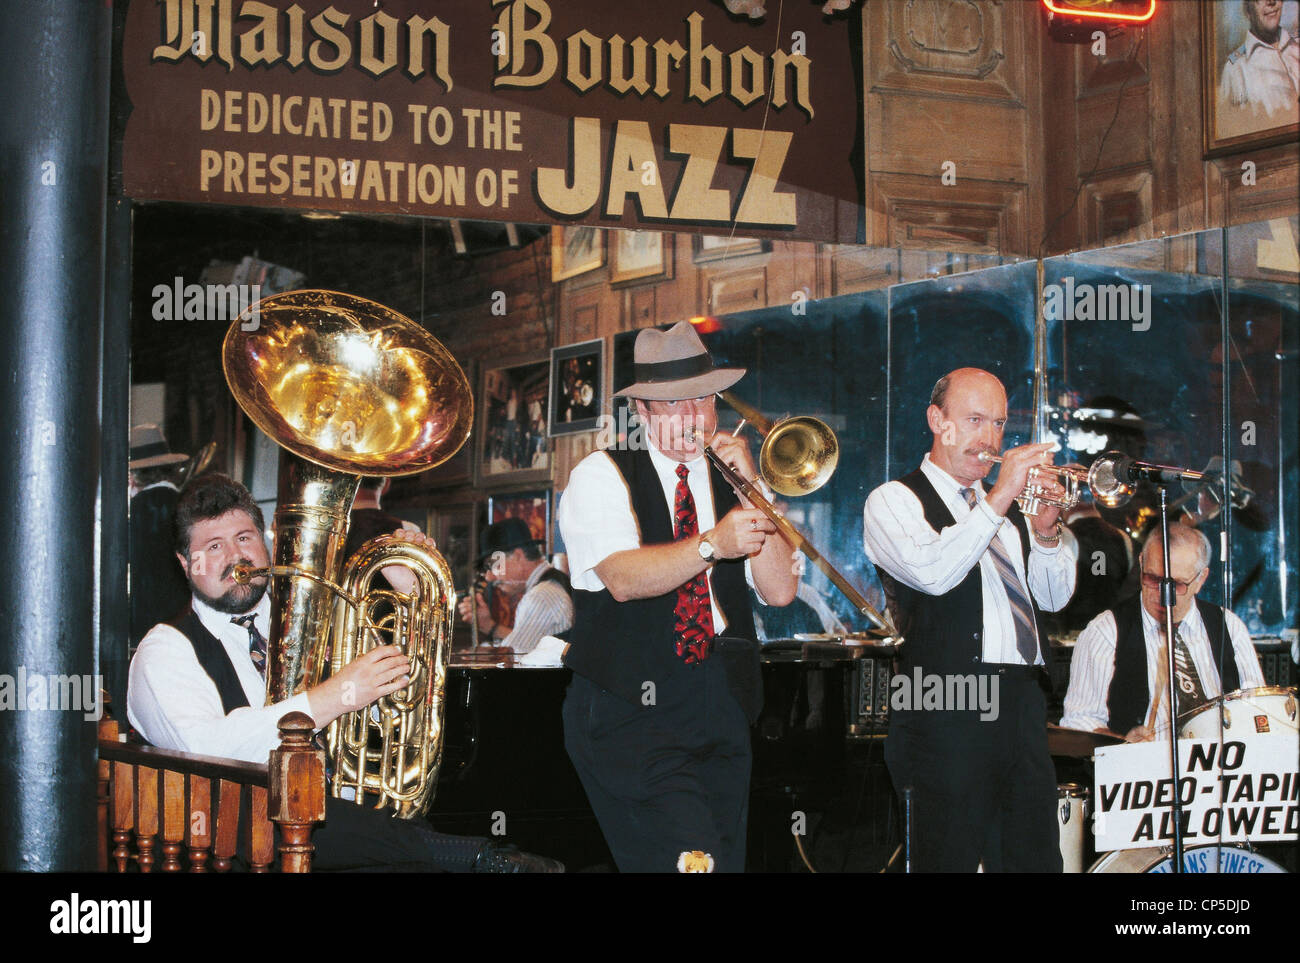 UNITED STATES OF AMERICA - LOUISIANA, NEW ORLEANS. Jazz bands in the French Quarter. Stock Photo